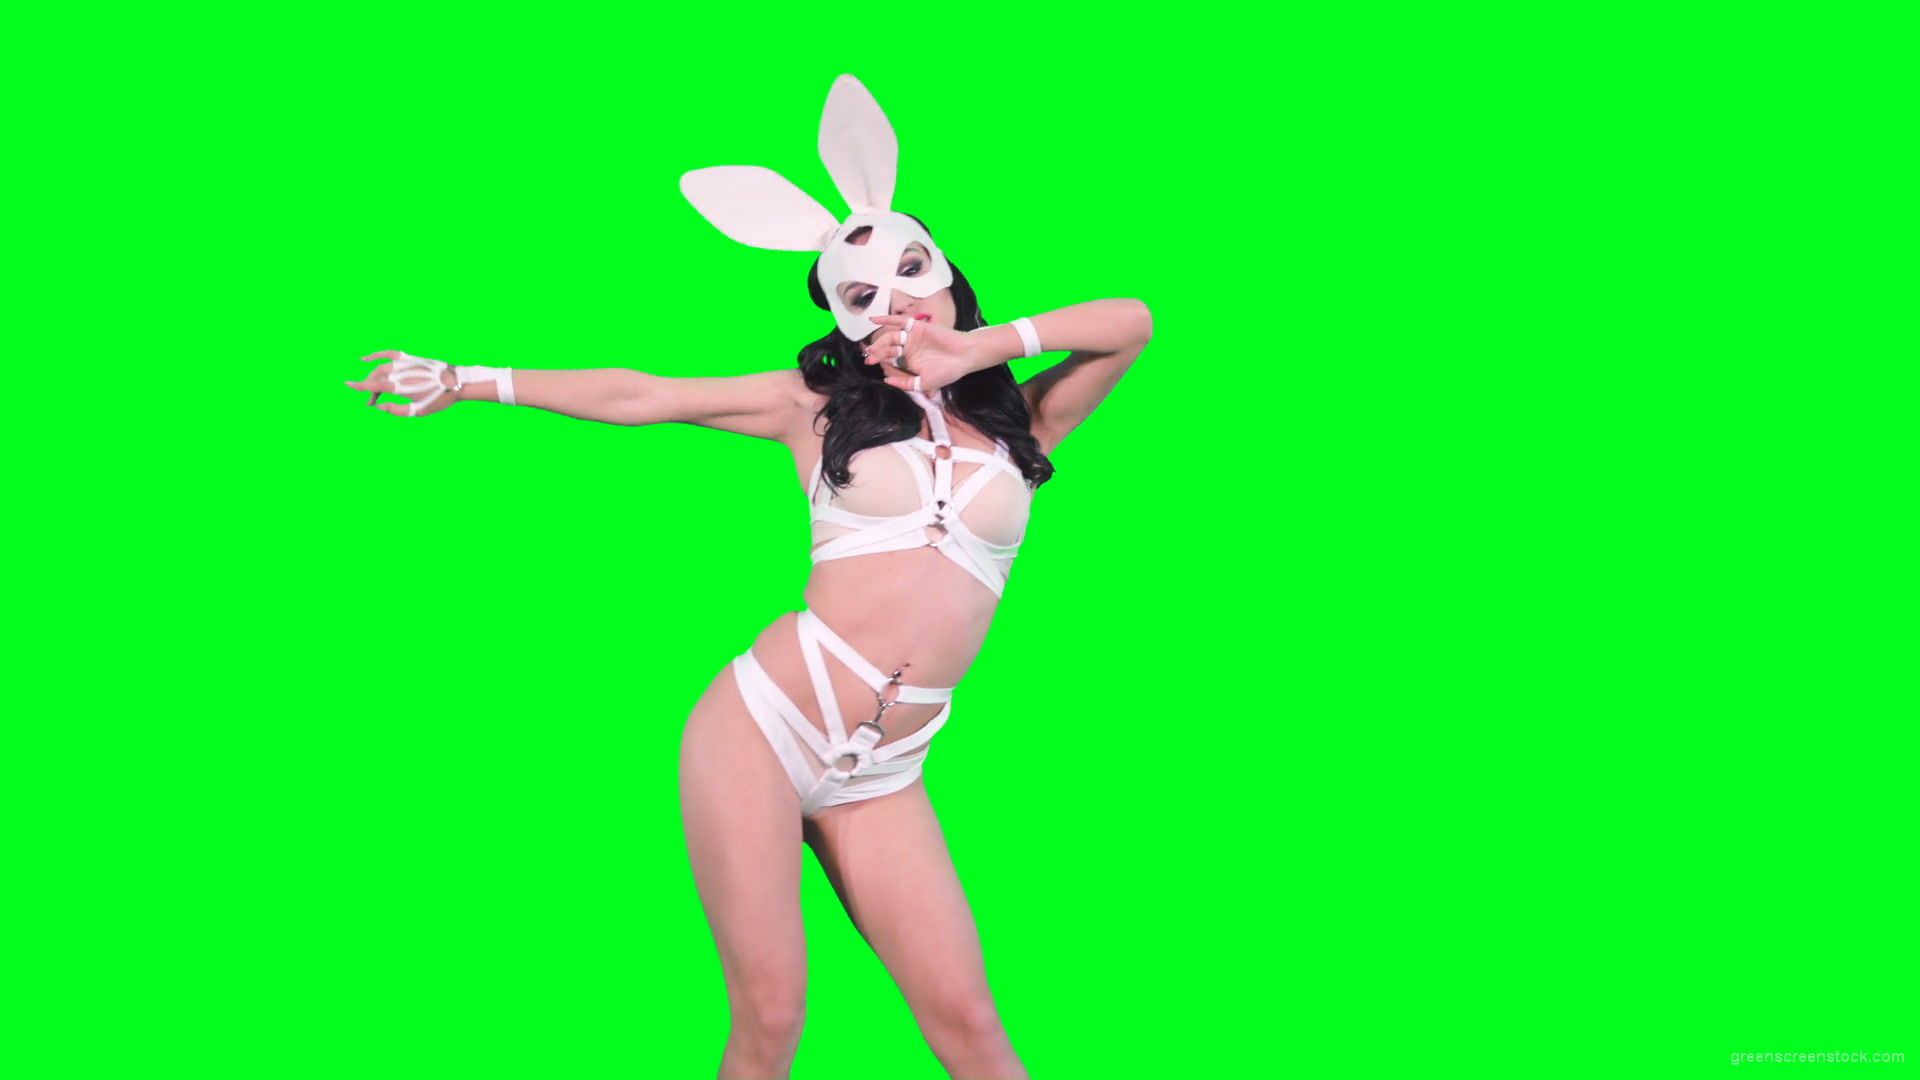 Sexy-bunny-girl-in-rabbit-costume-on-green-screen-4K-Video-Footage-1920_002 Green Screen Stock